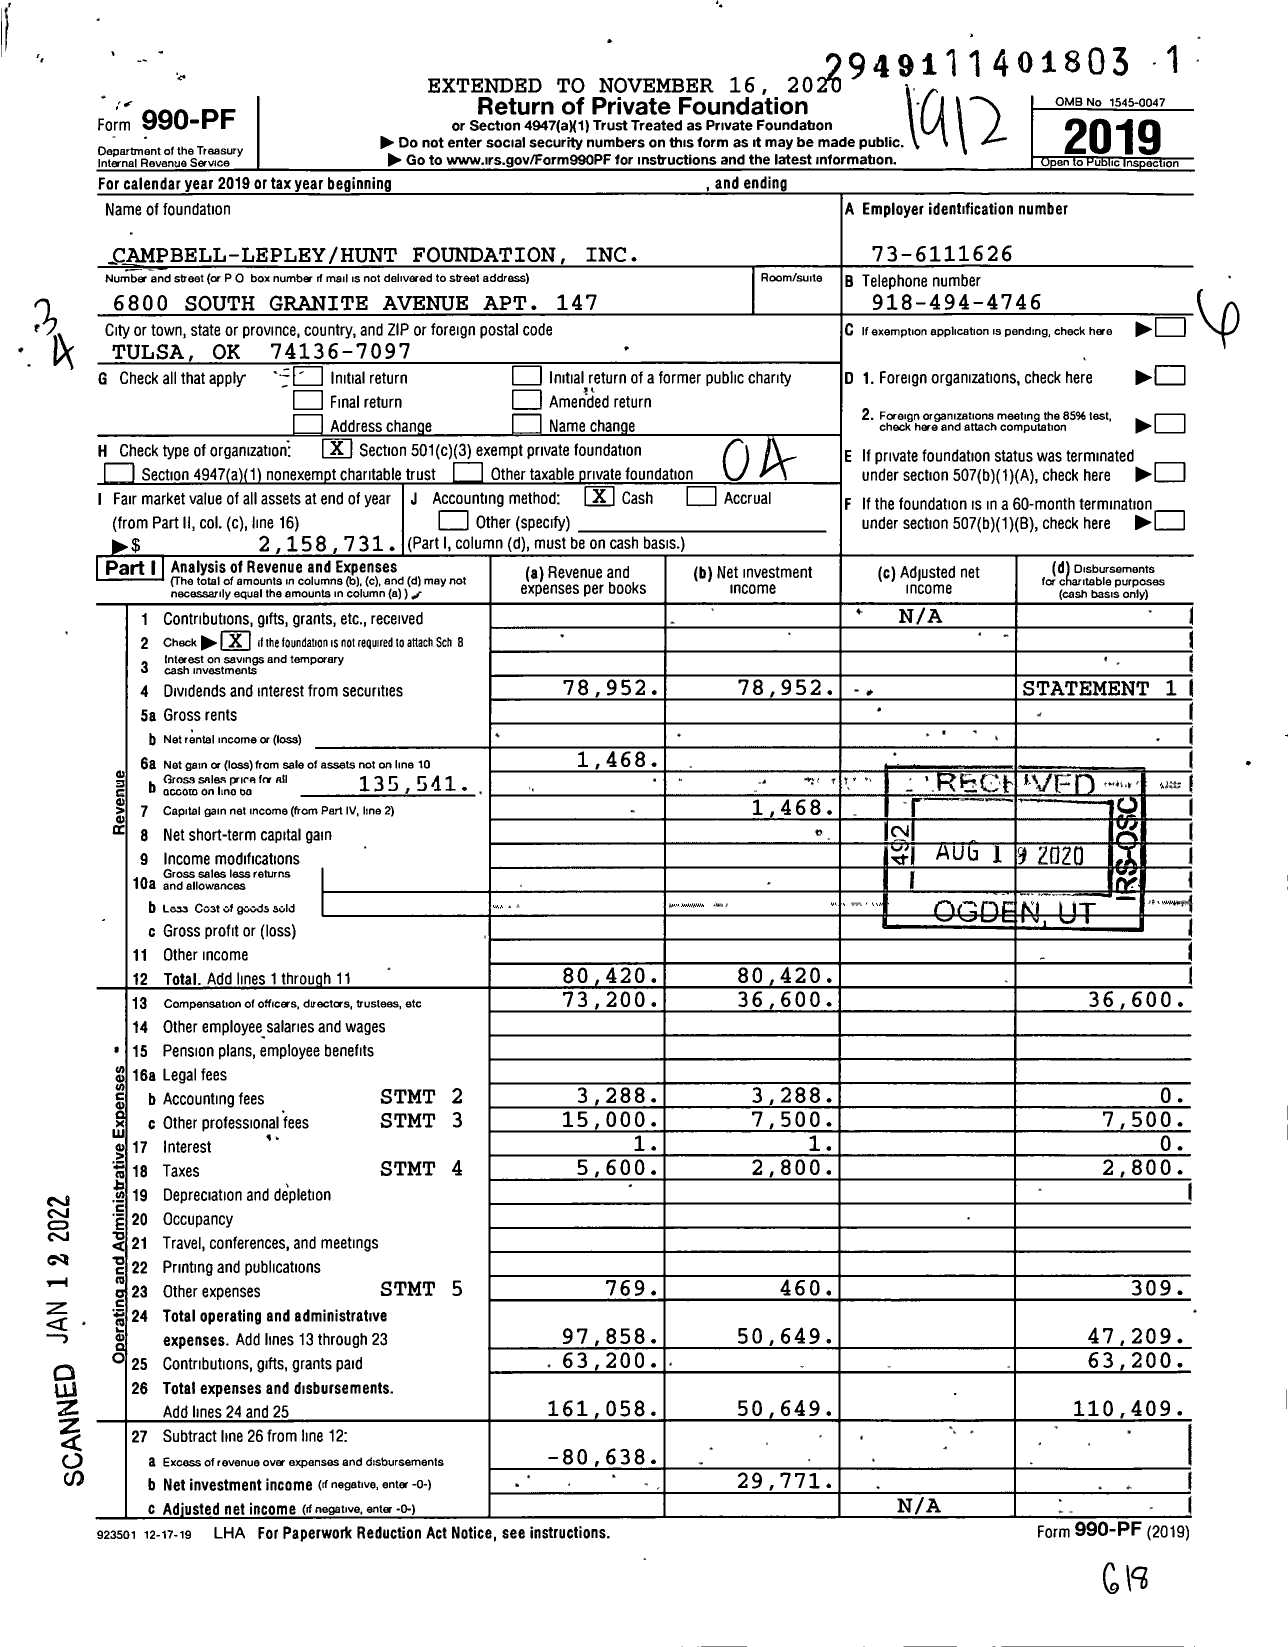 Image of first page of 2019 Form 990PF for Campbell-Lepleyhunt Foundation